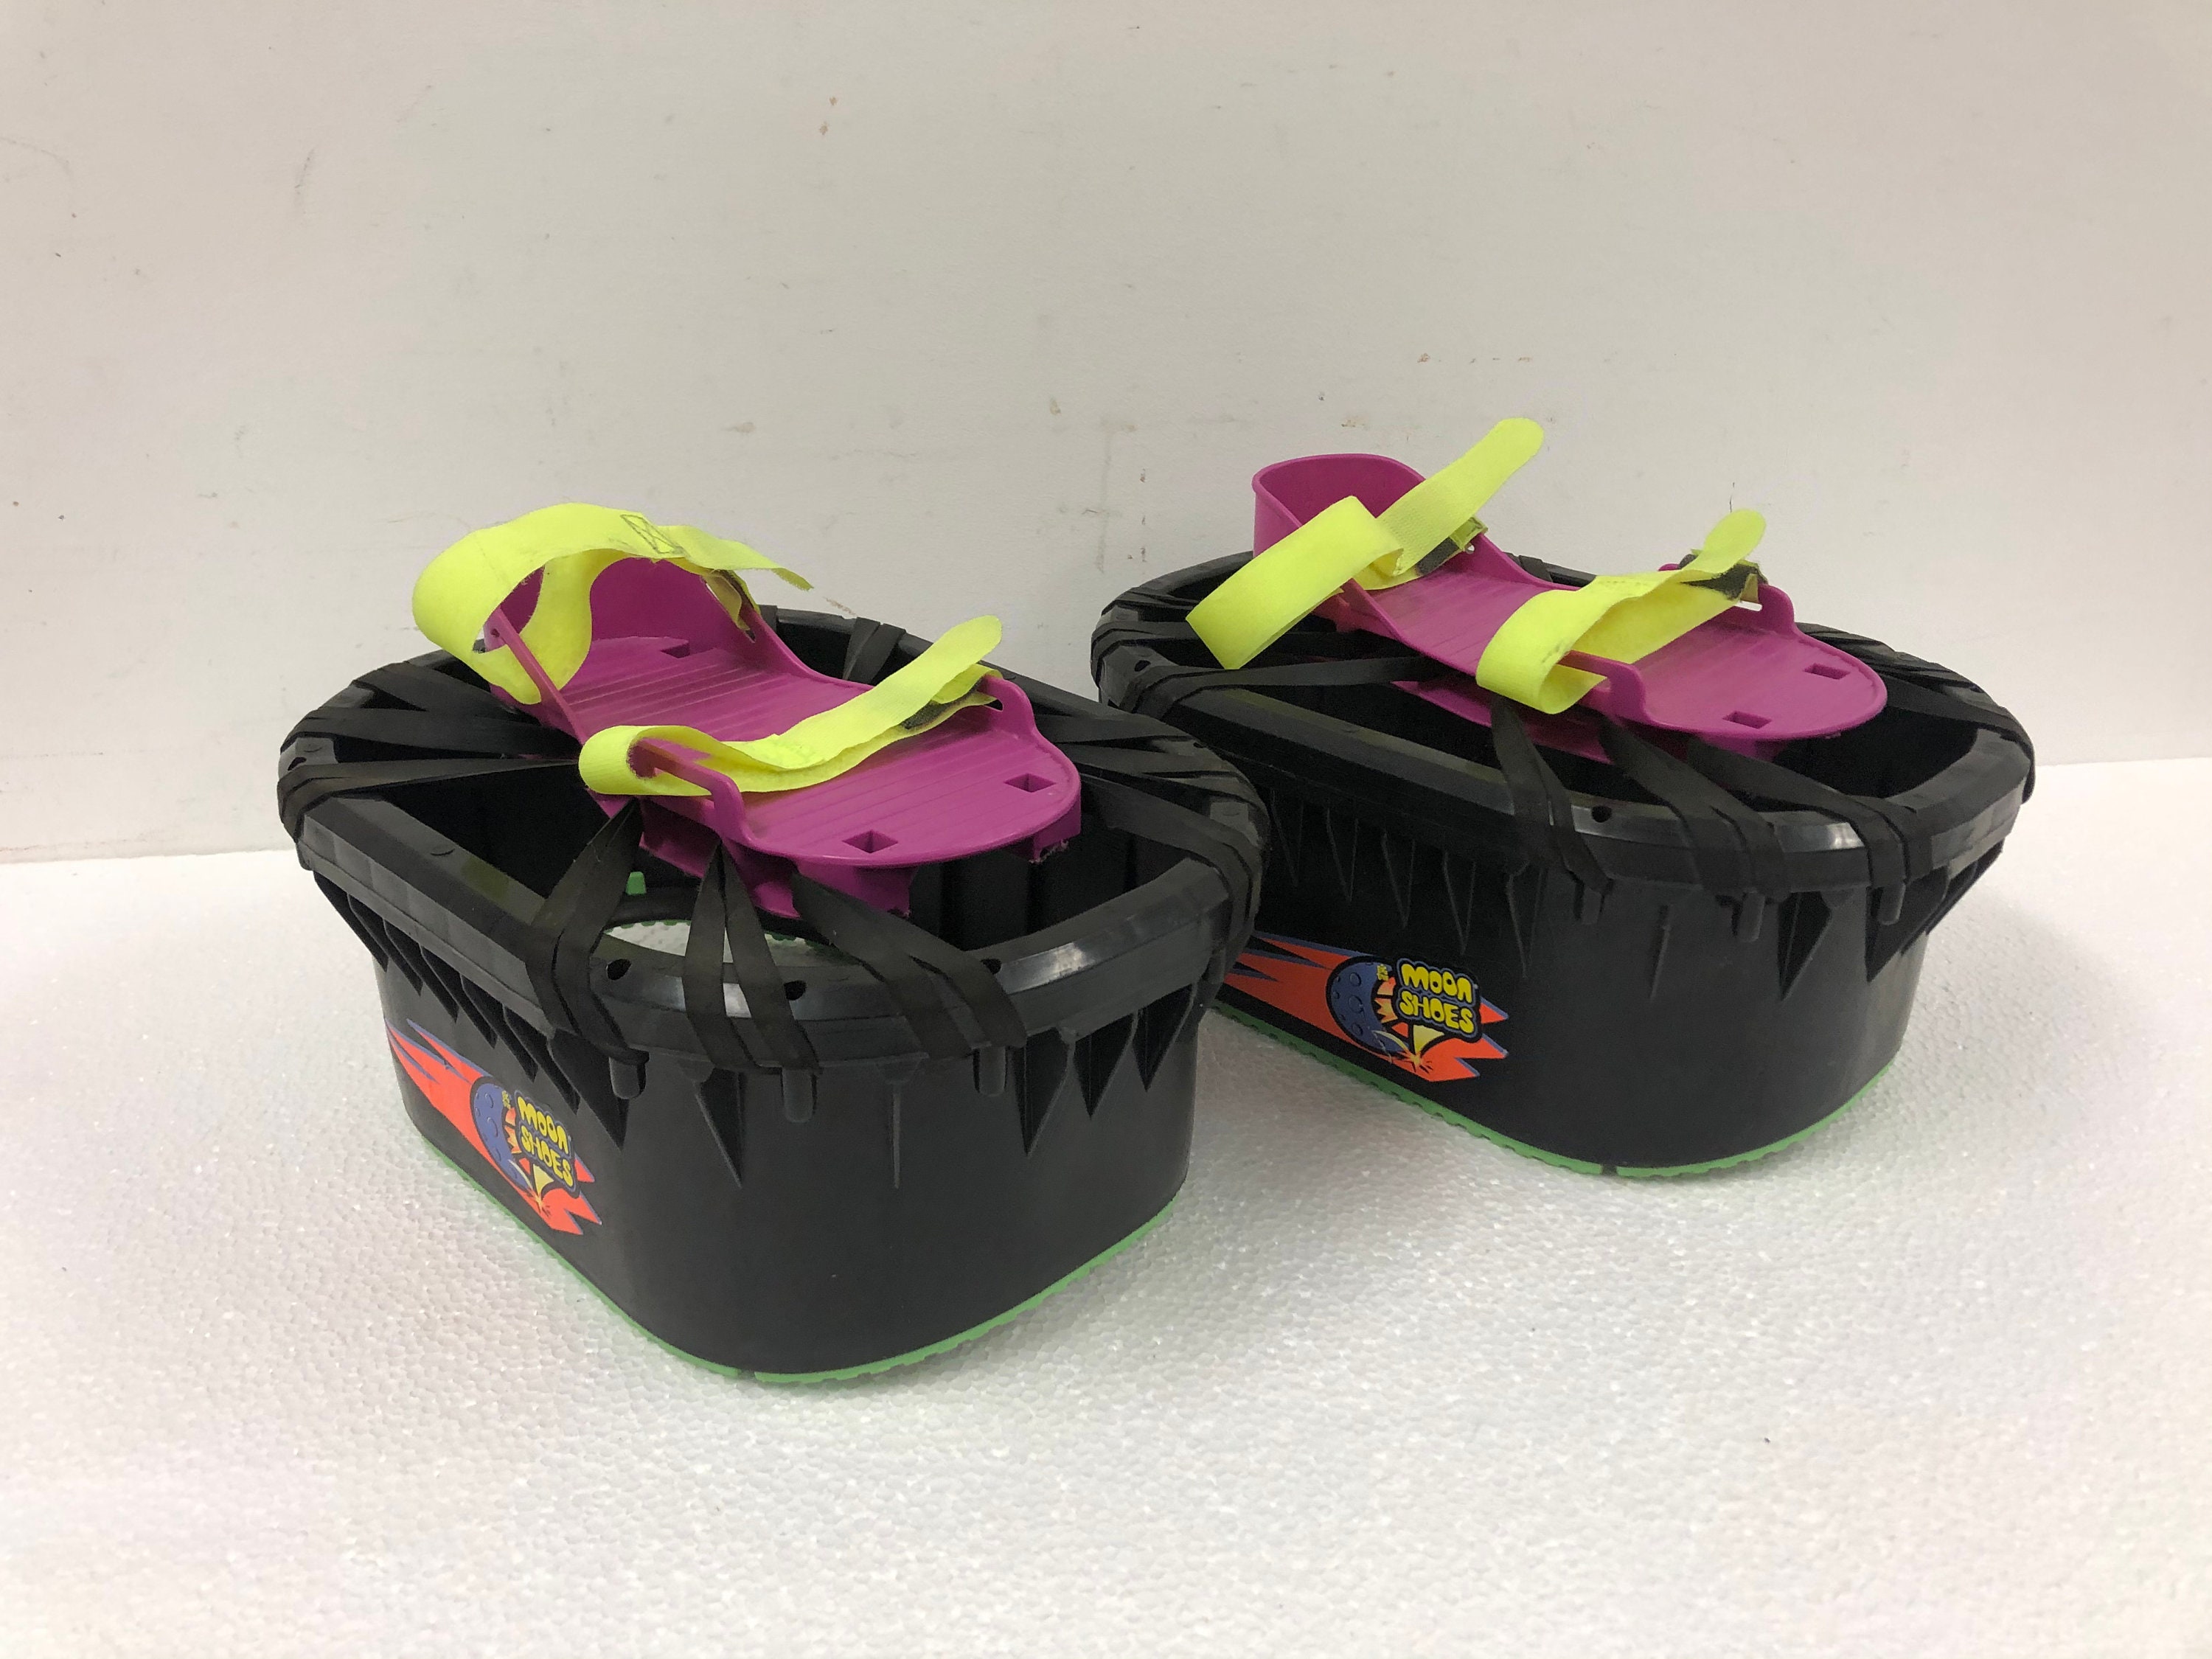 Vintage Moon Shoes Big Time Toys 1990s Nickelodeon Antigravity